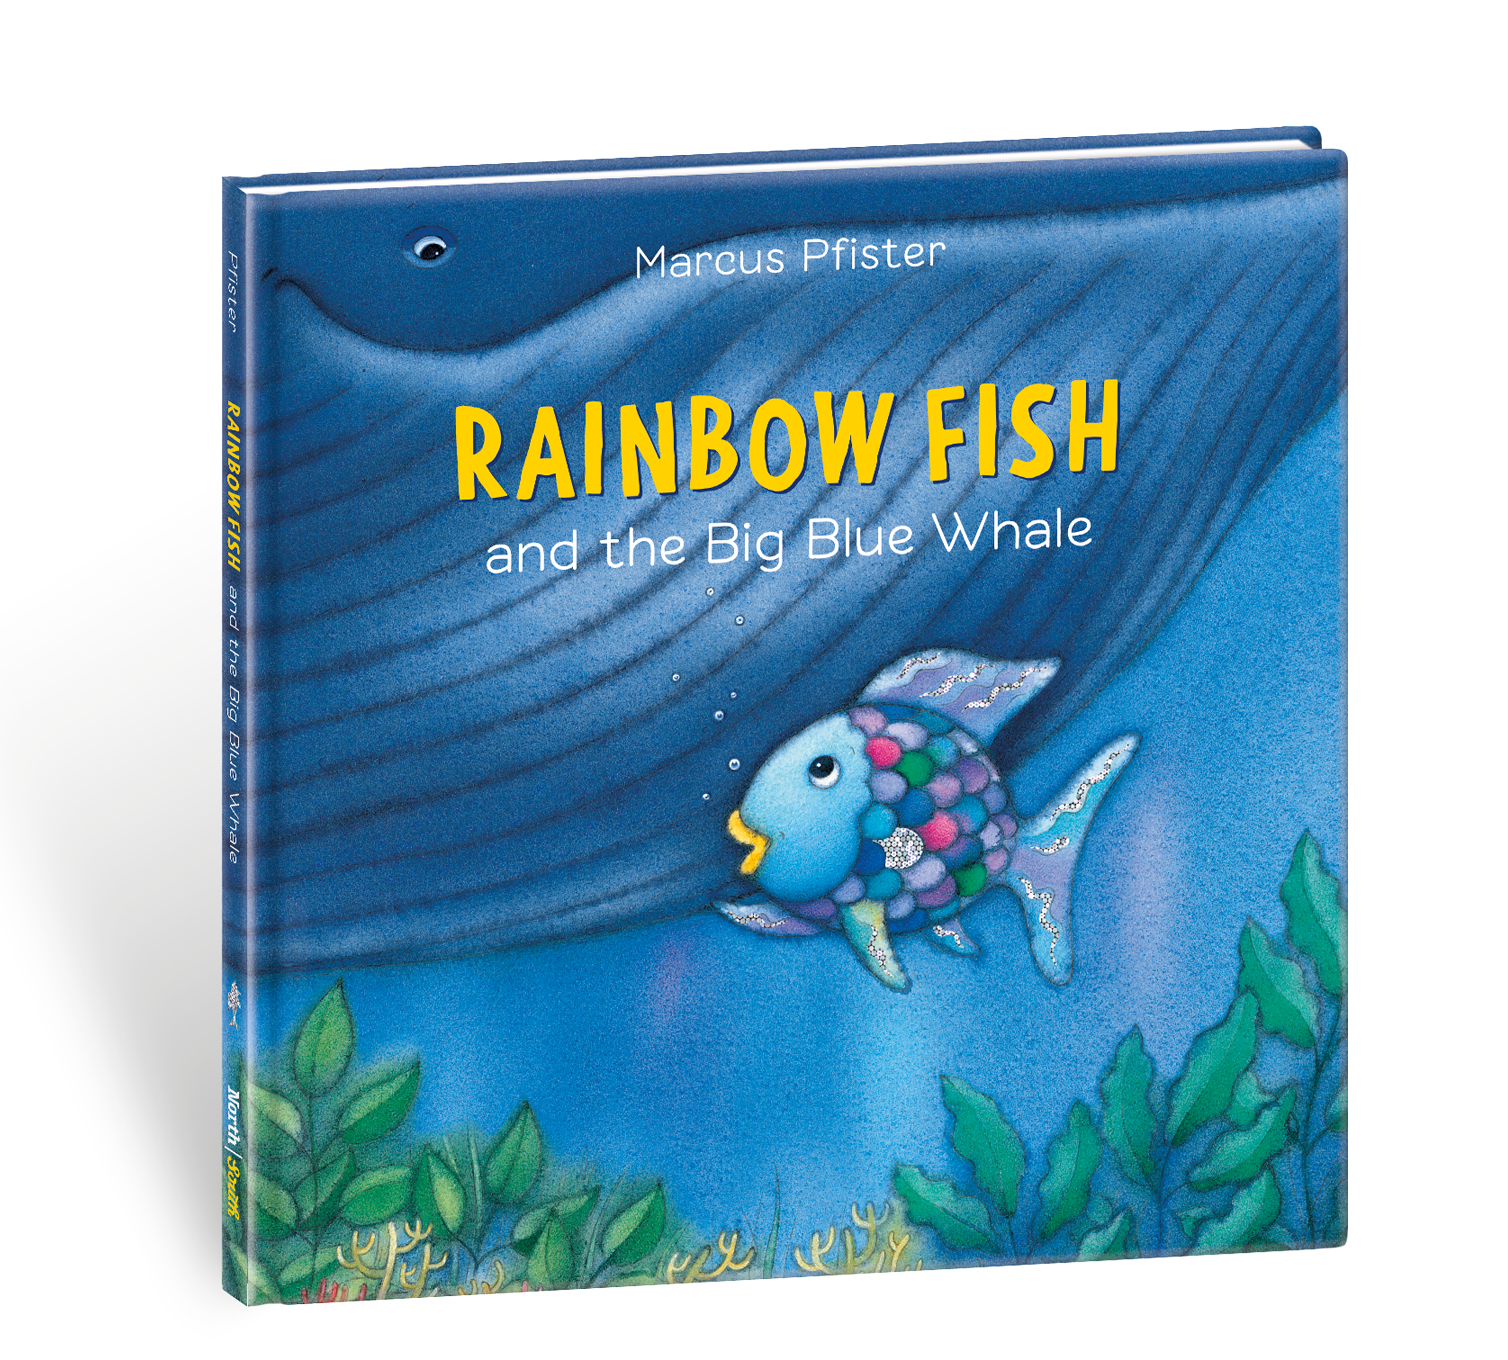 Rainbow Fish and the Whale (DVD-ROM) for Windows - Bitcoin